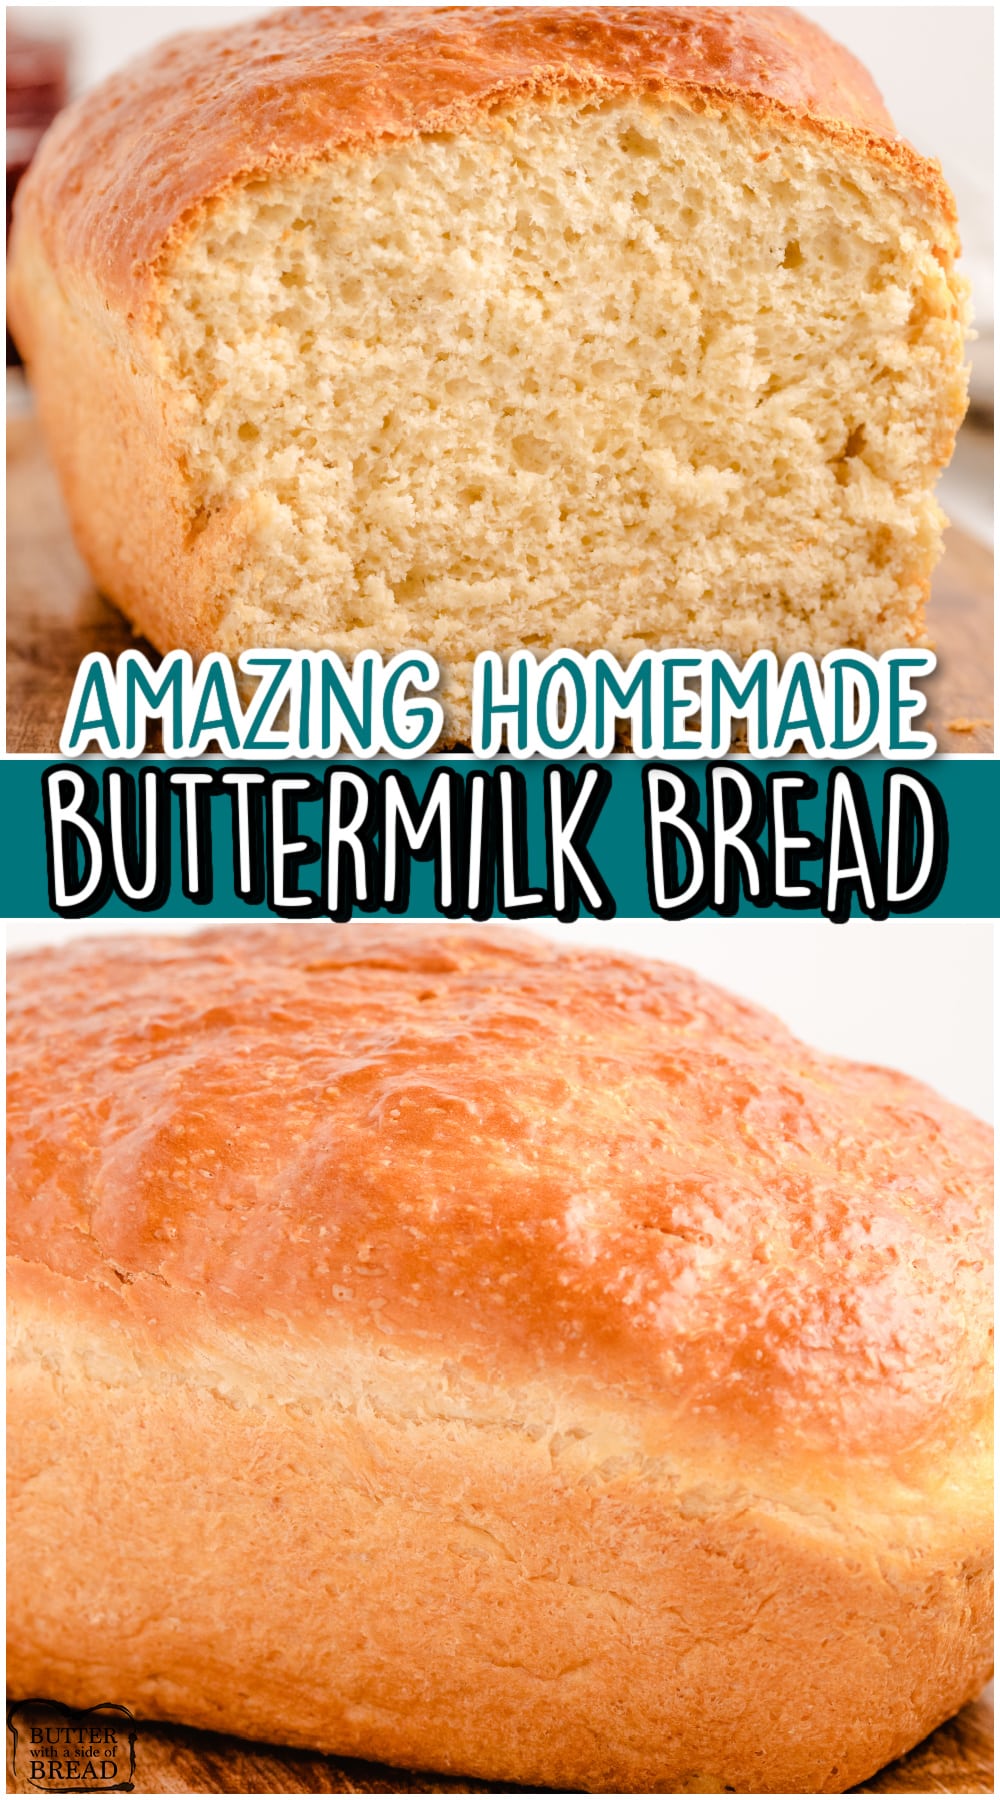 Homemade Buttermilk Bread made easy at home with 6 ingredients! This buttermilk bread recipe creates a soft loaf that has incredible flavor & can even be made in your bread machine.